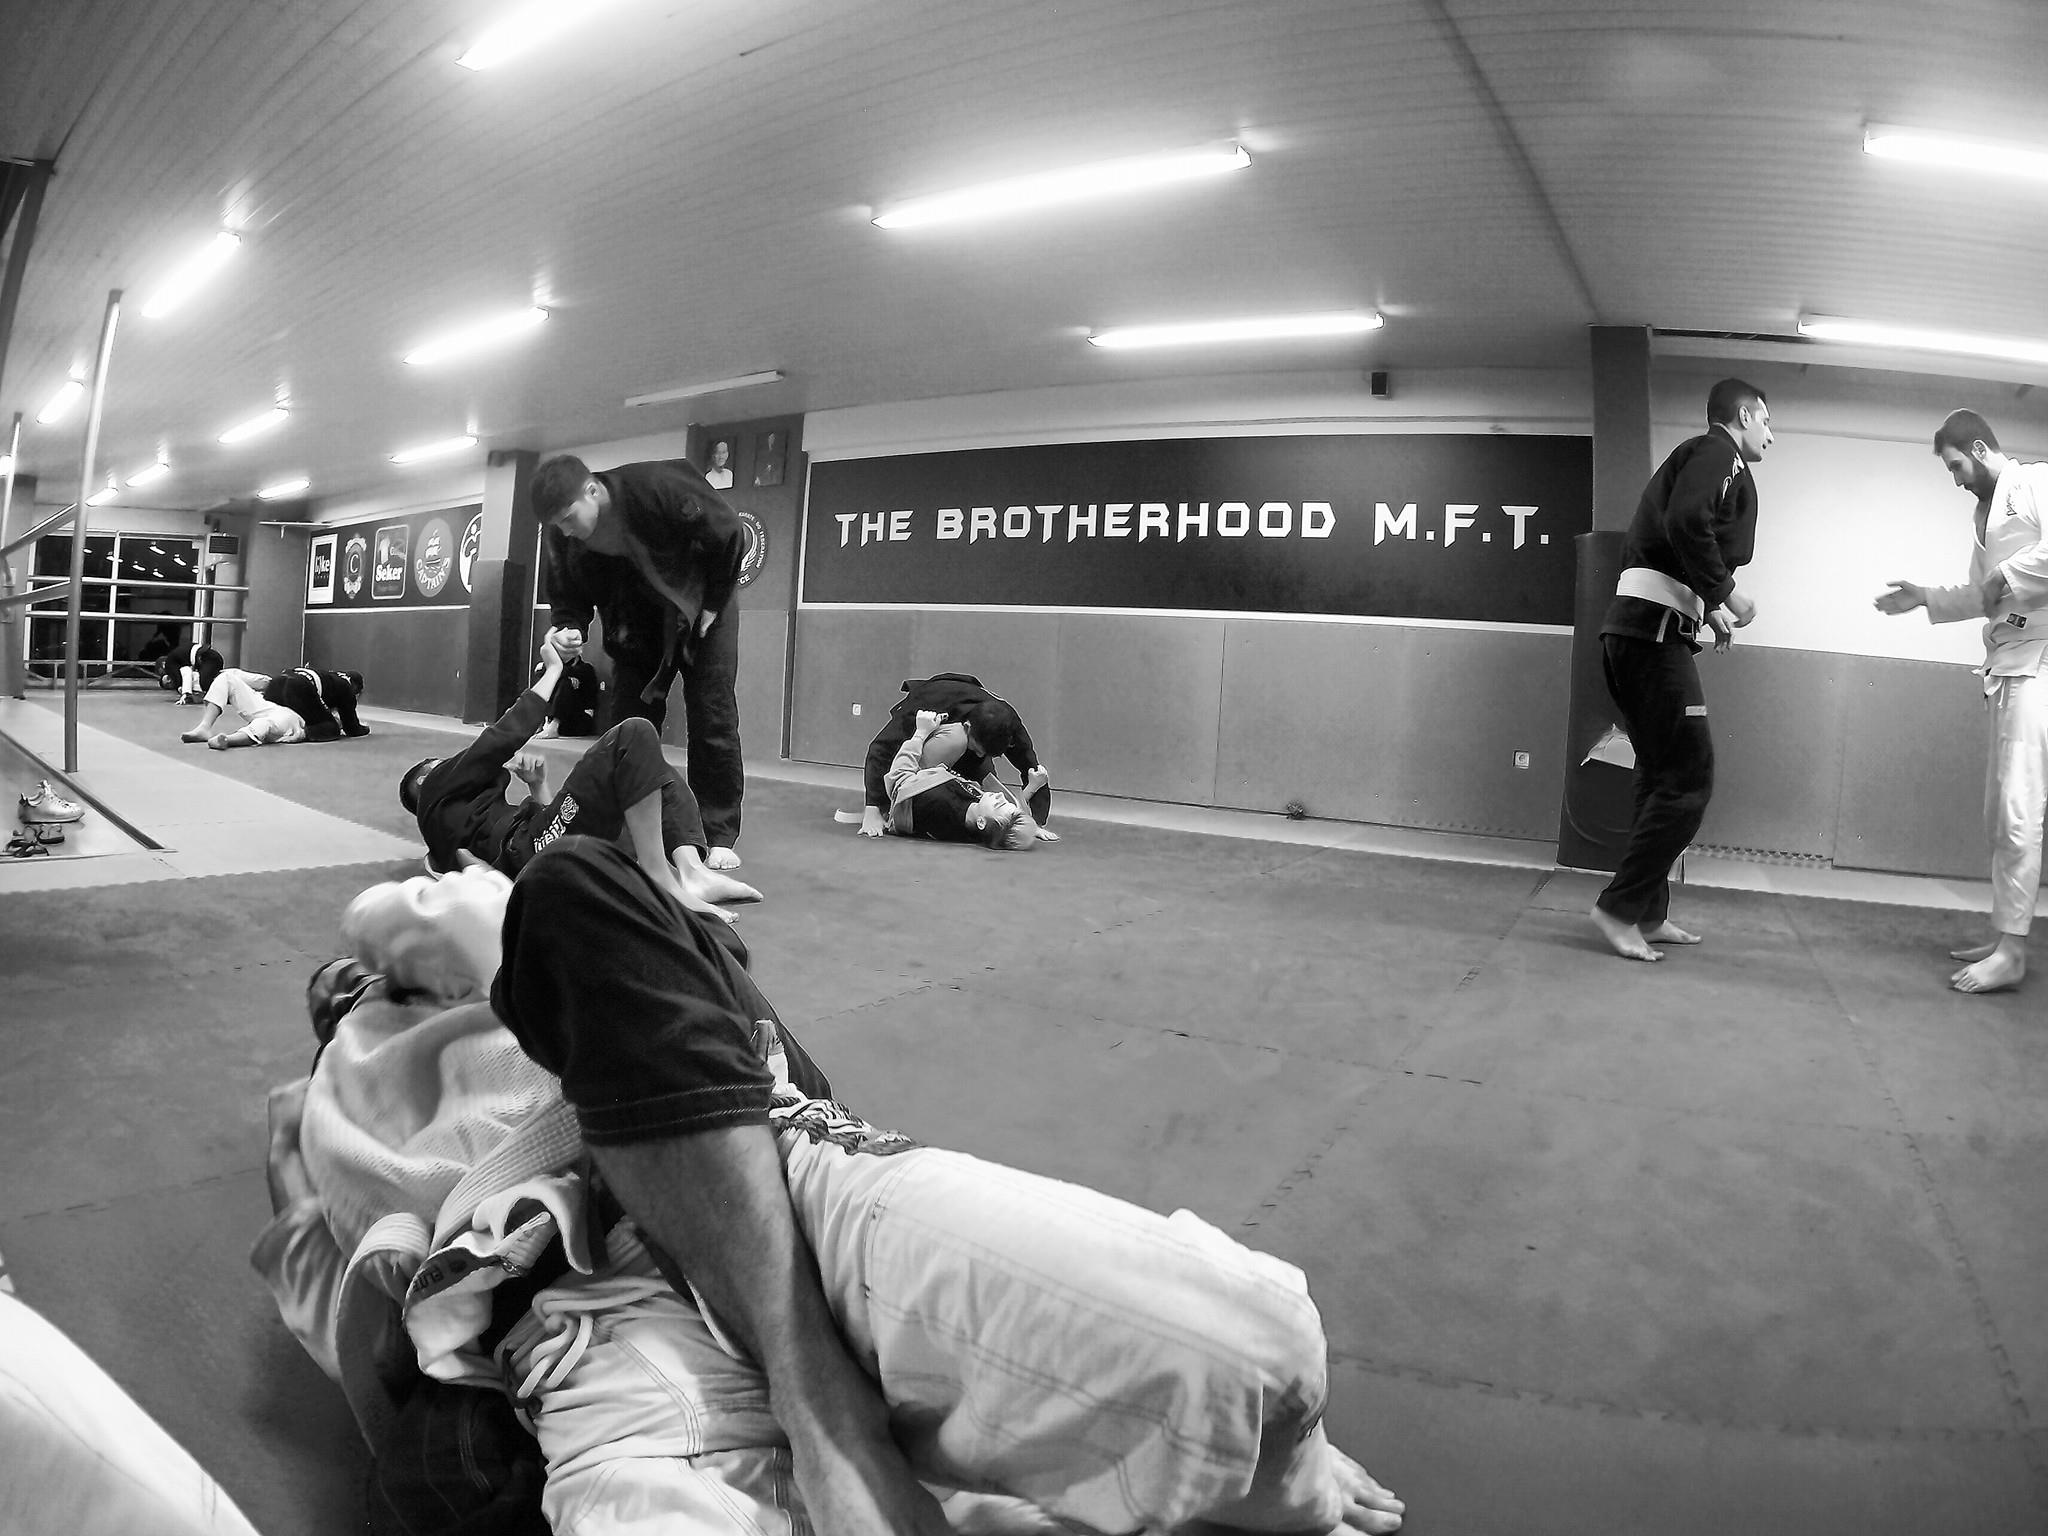 The Brotherhood - Grappling Project